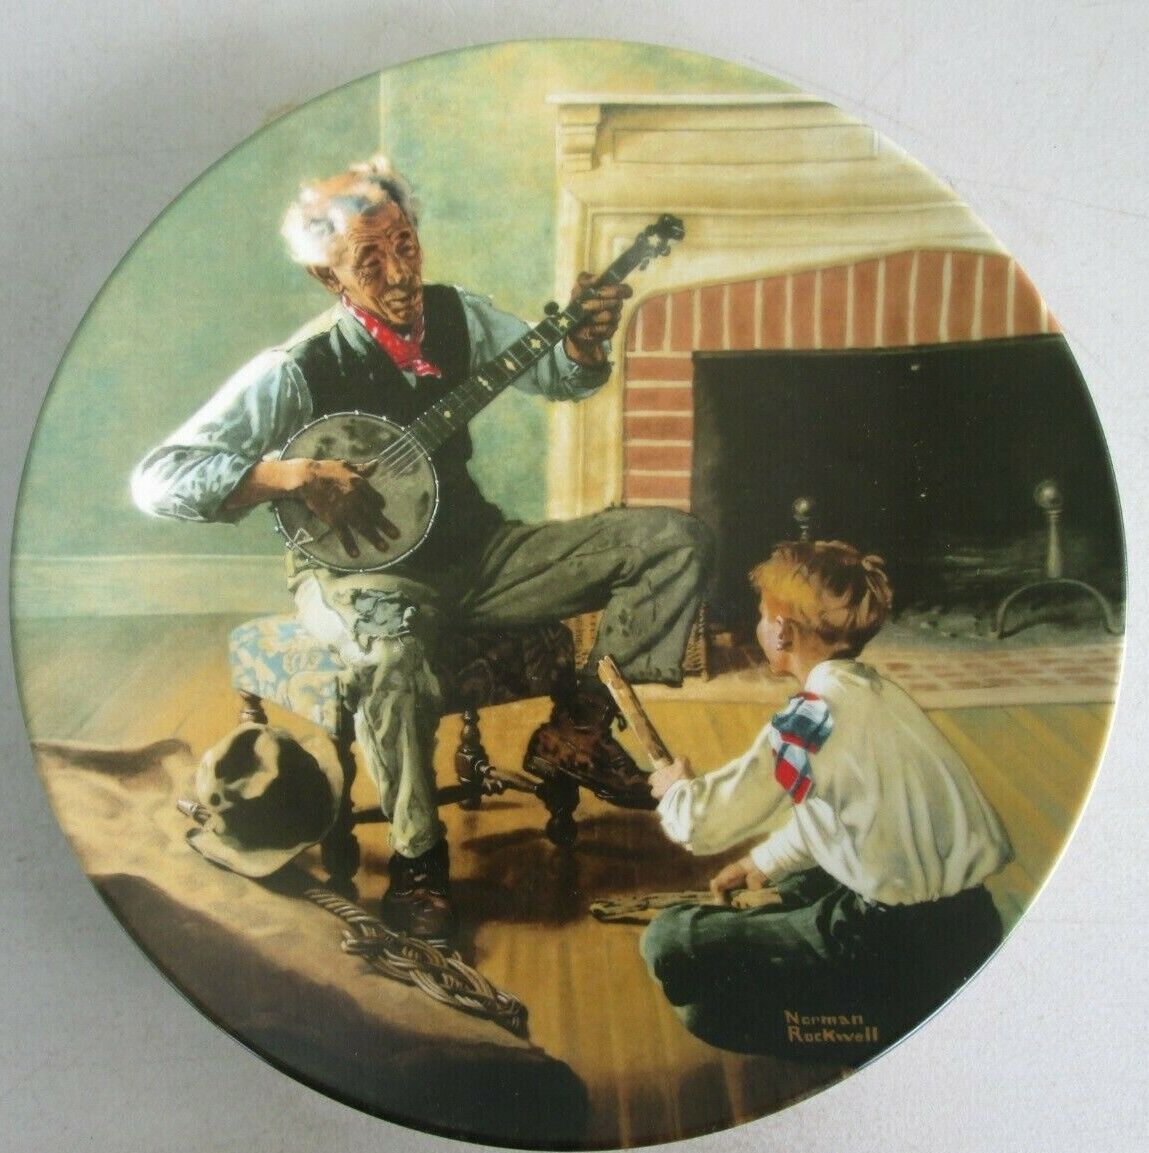 Rockwell Collector Plate The Banjo Player 1989 NO BOX